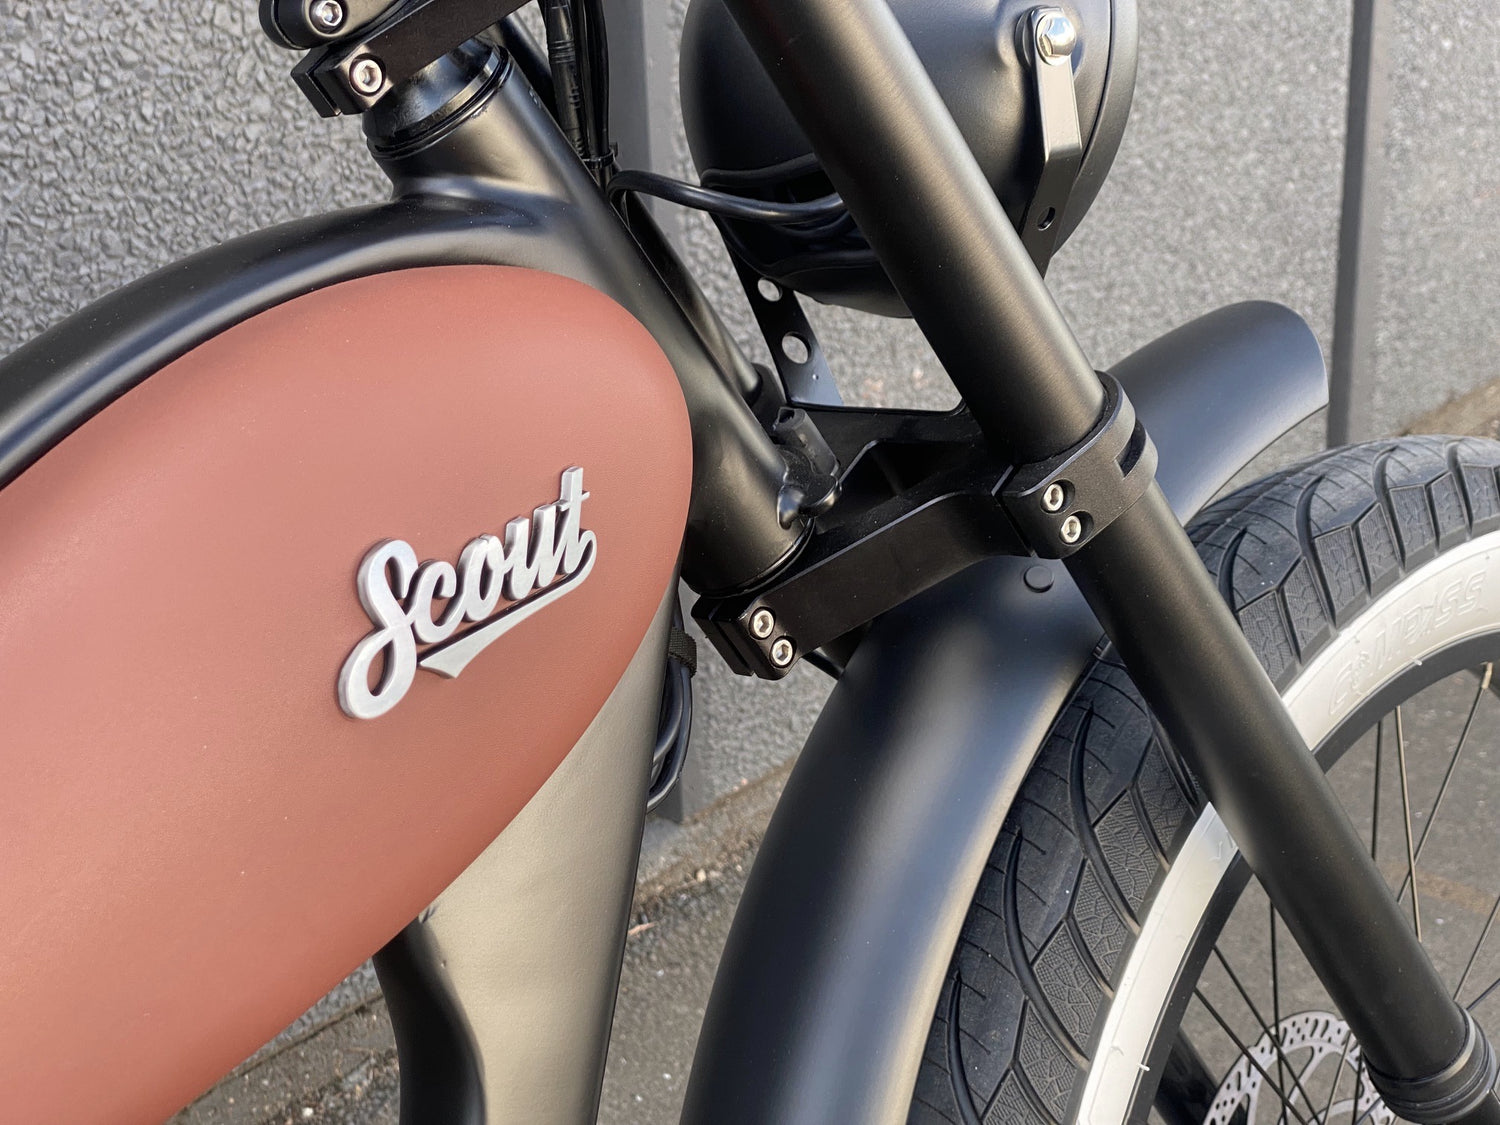 Th Scout Electric Motorbike from Boostbikes pays homage to track motorcycles of the early 1900s with fat tyres for on or off road, forest tracks, beaches and boardwalks